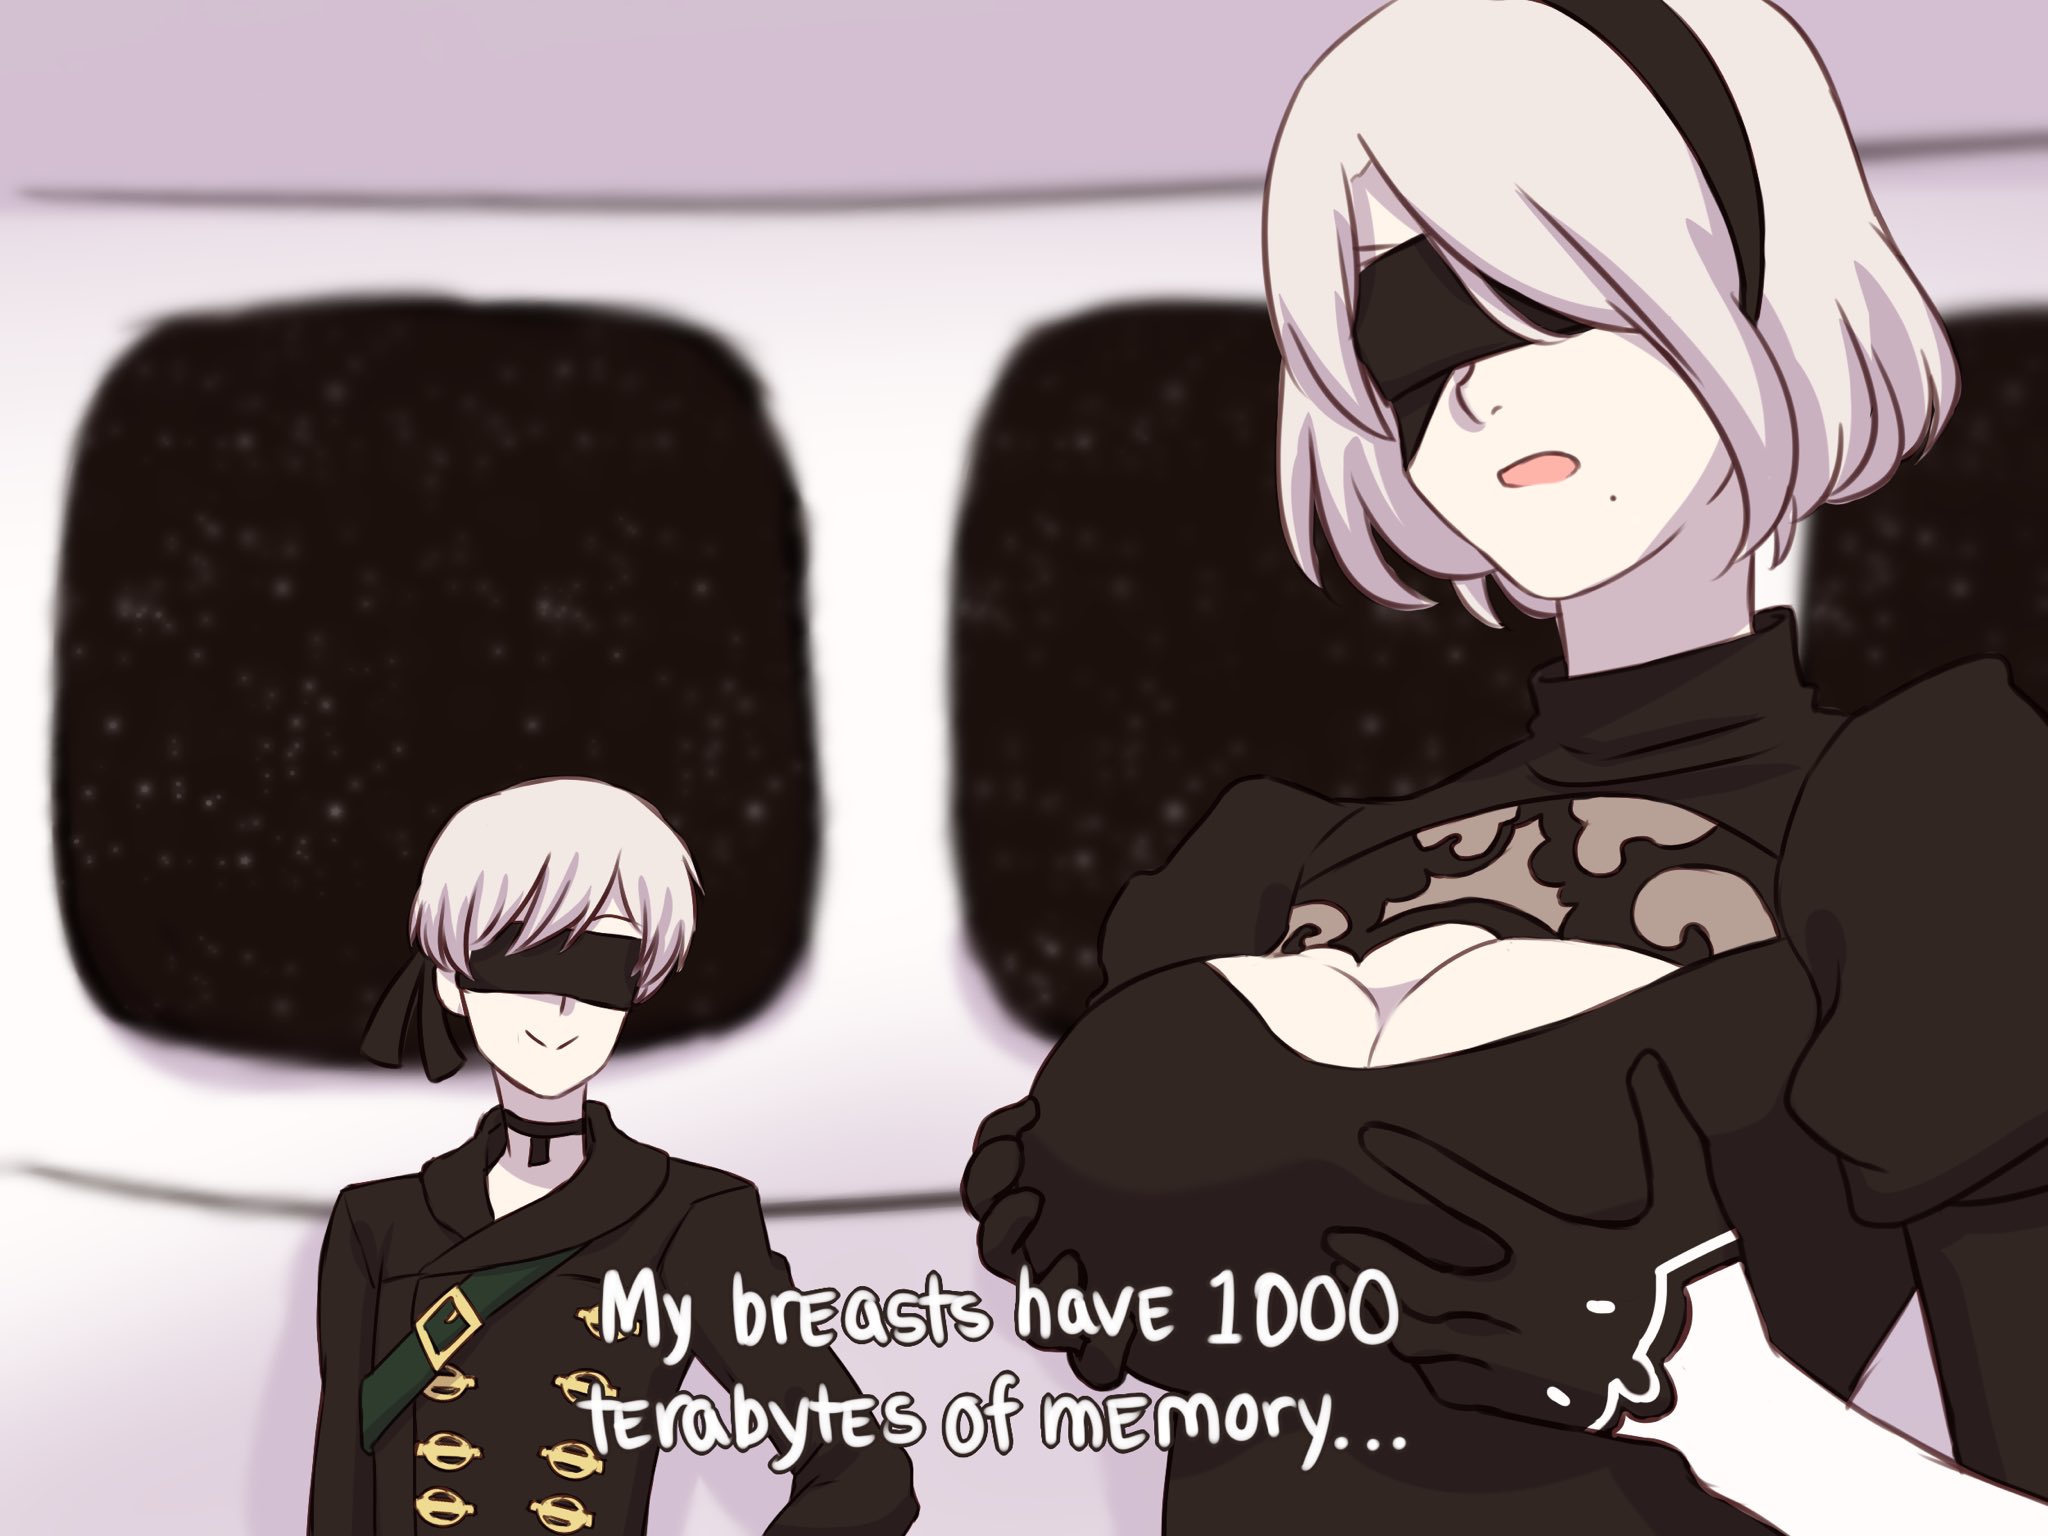 9S stores ancient dog memes in 2B’s boobs. 